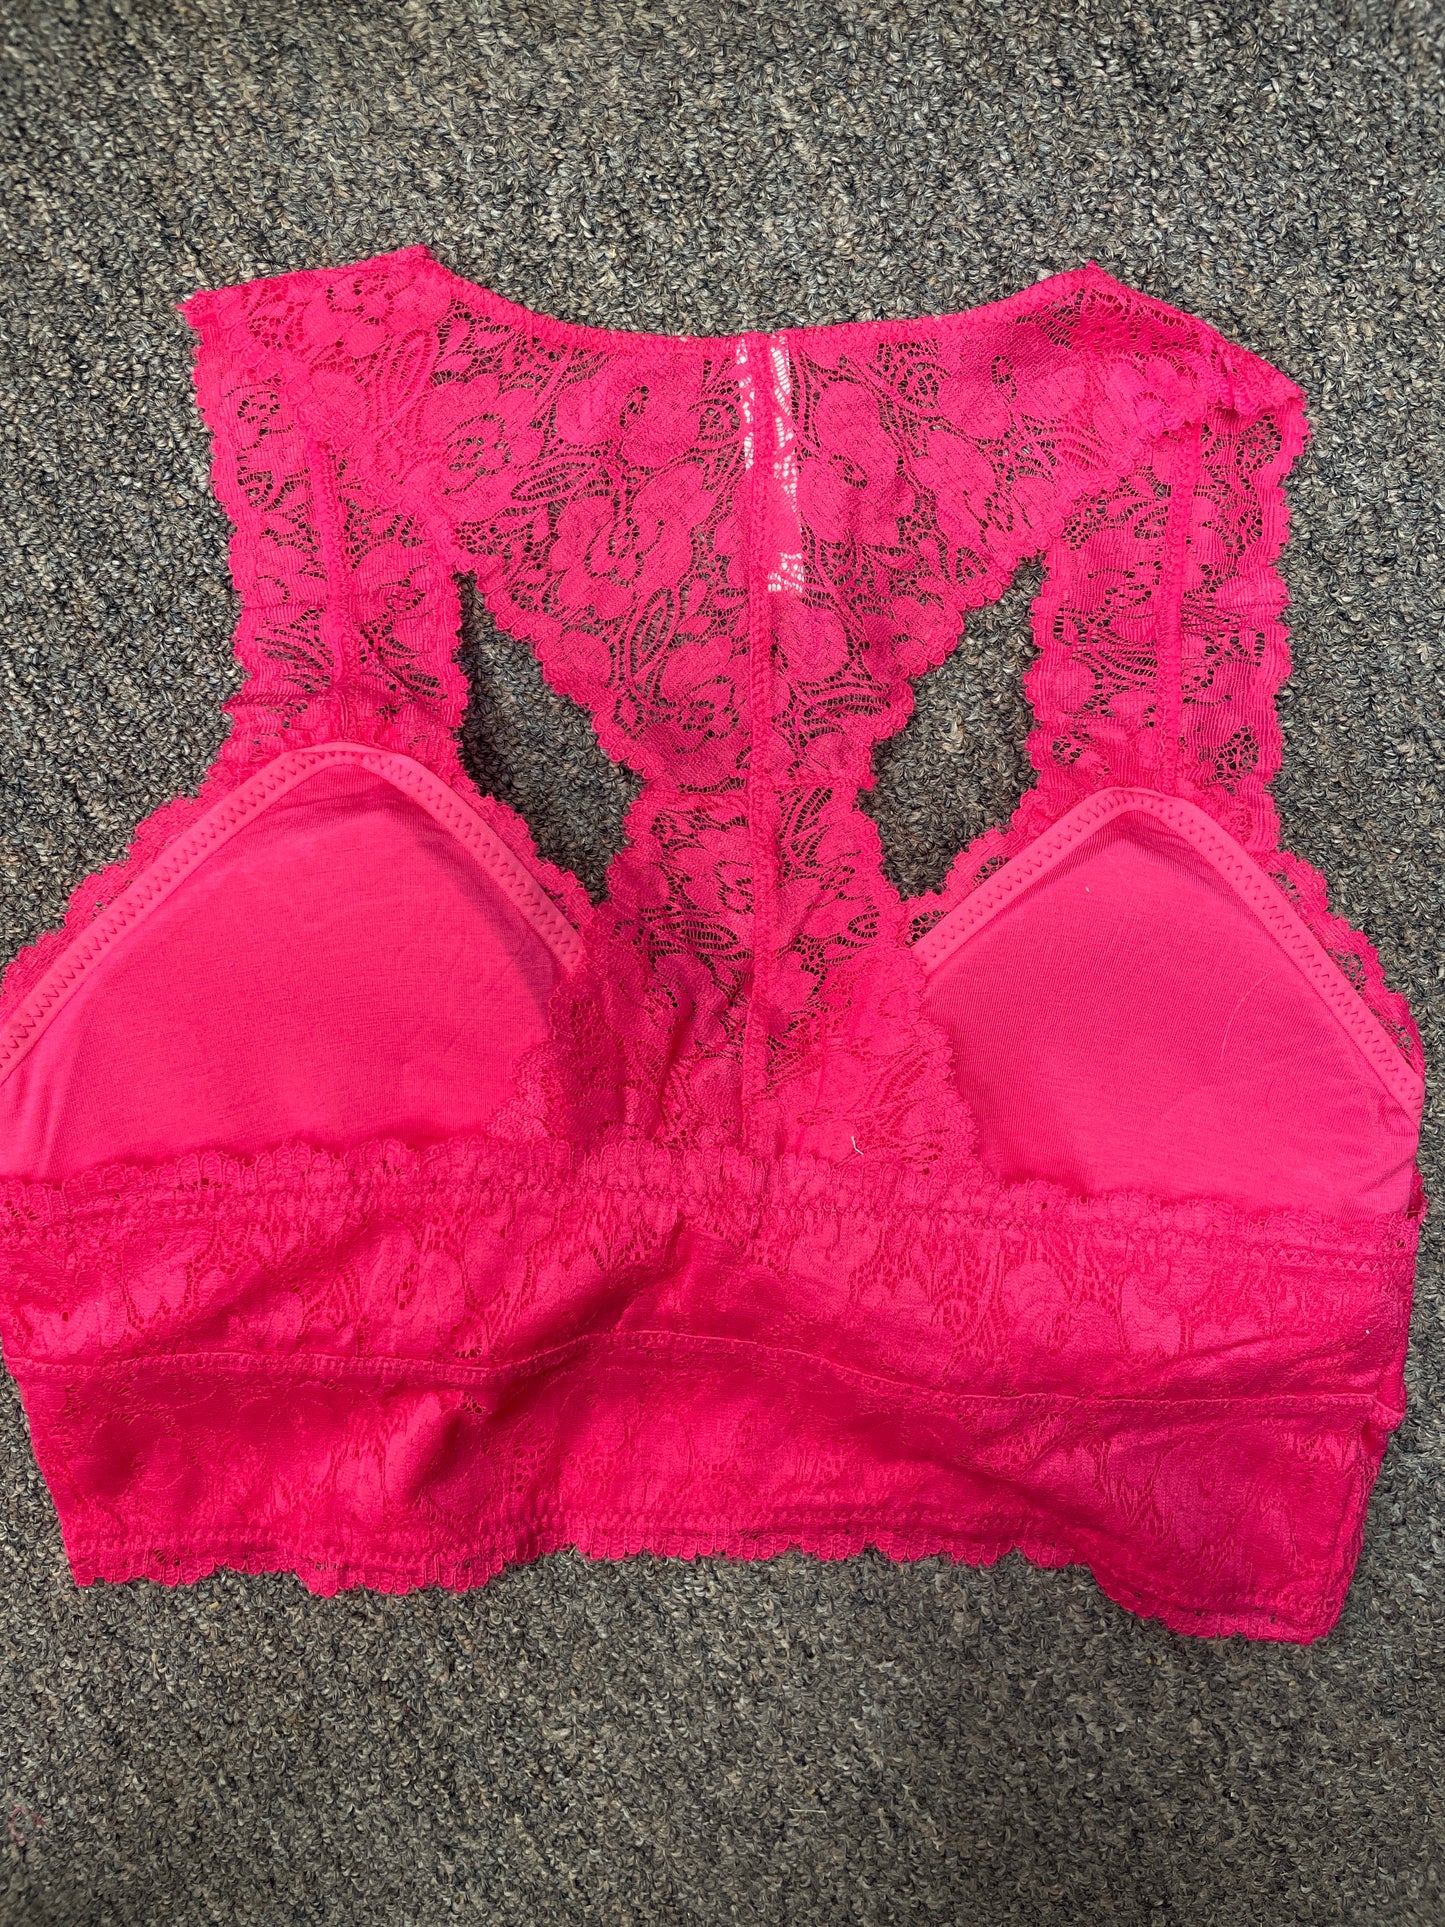 Hot Pink Lace Bralette